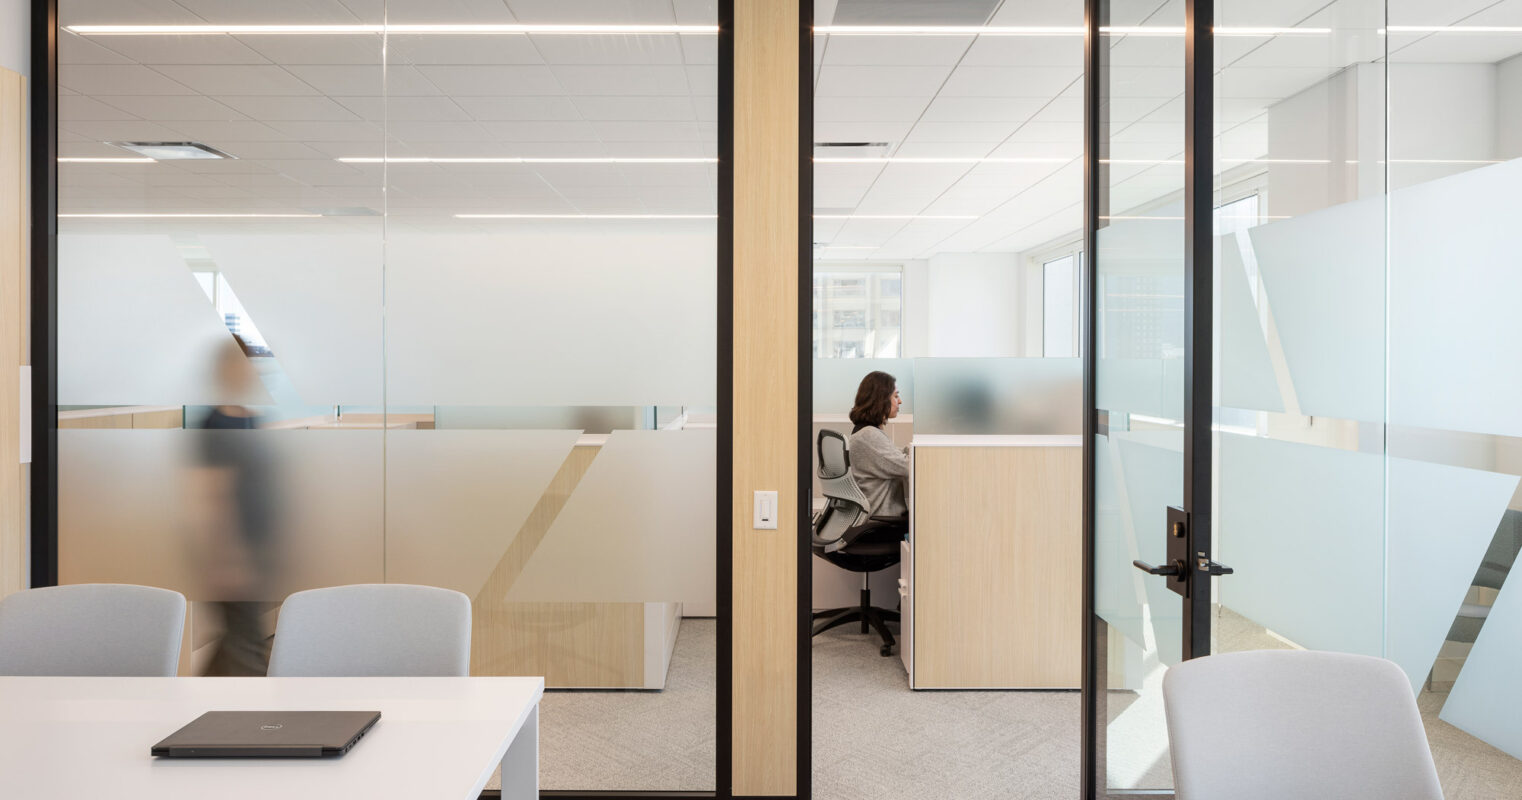 Modern office meeting room with frosted glass partitions, light wood finishes, and ergonomic chairs, alongside a view into an individual focused workspace, symbolizing privacy and collaboration in a corporate setting.